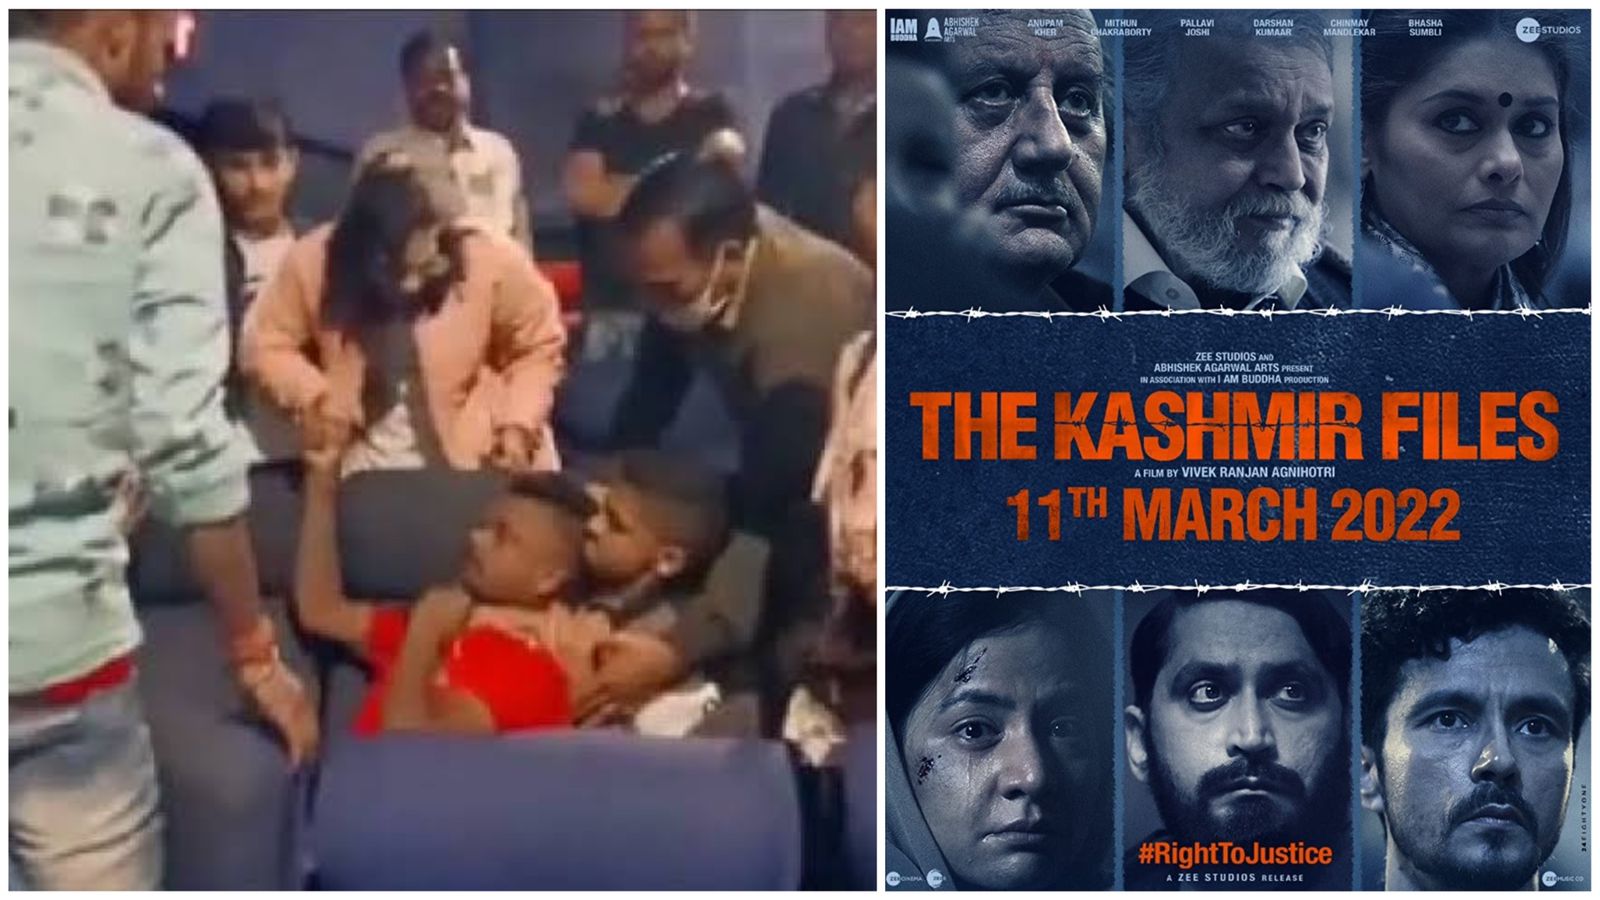 Man Gets 4d Experience At The Kashmir File Thrown Out From Theatre